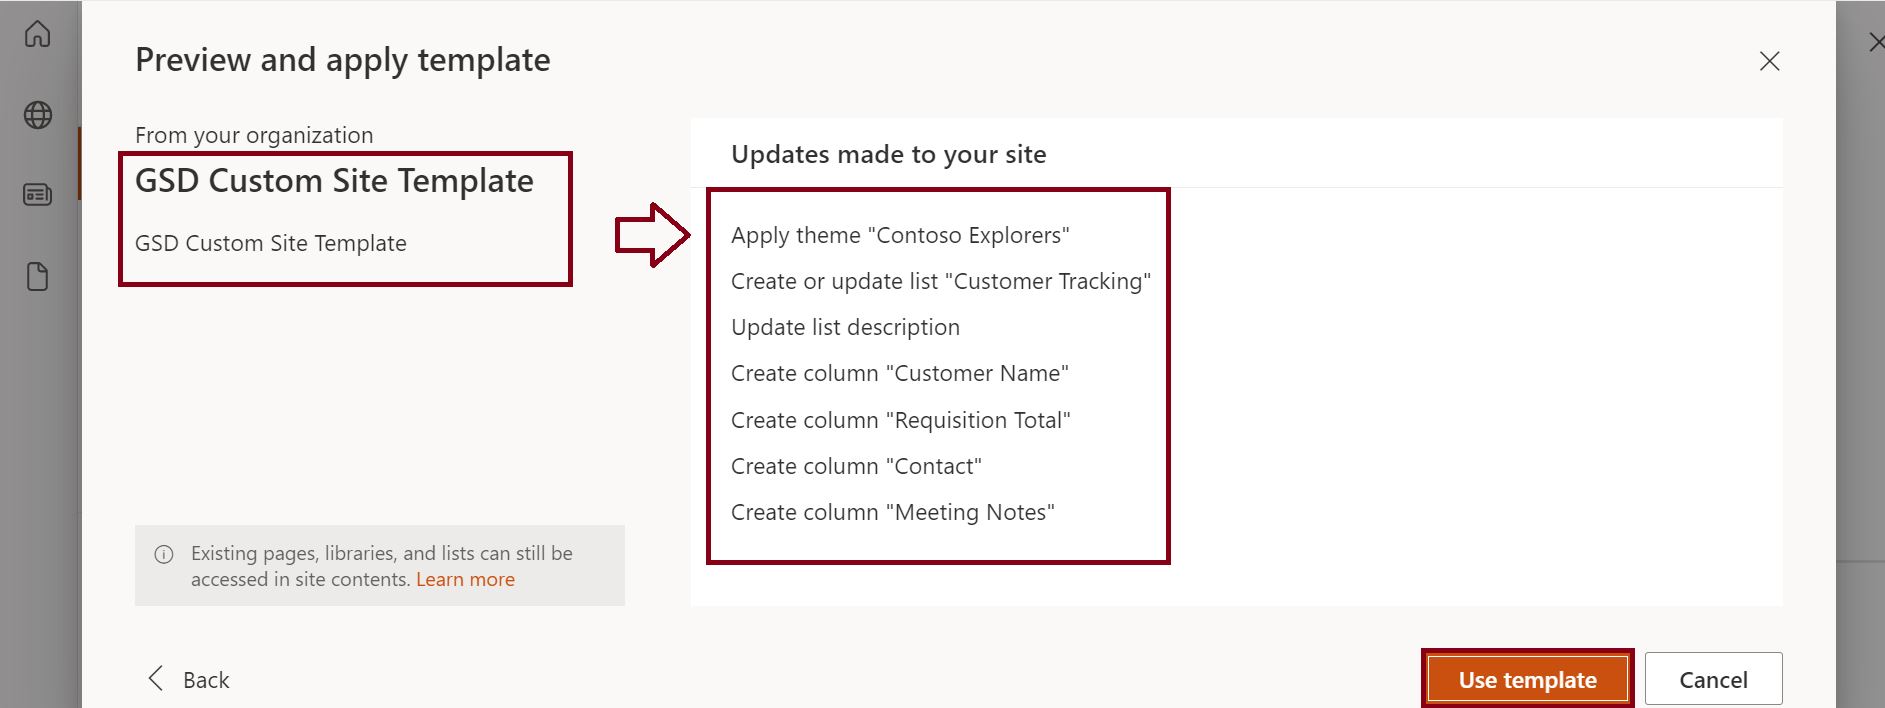 Preview and apply template in SharePoint Online